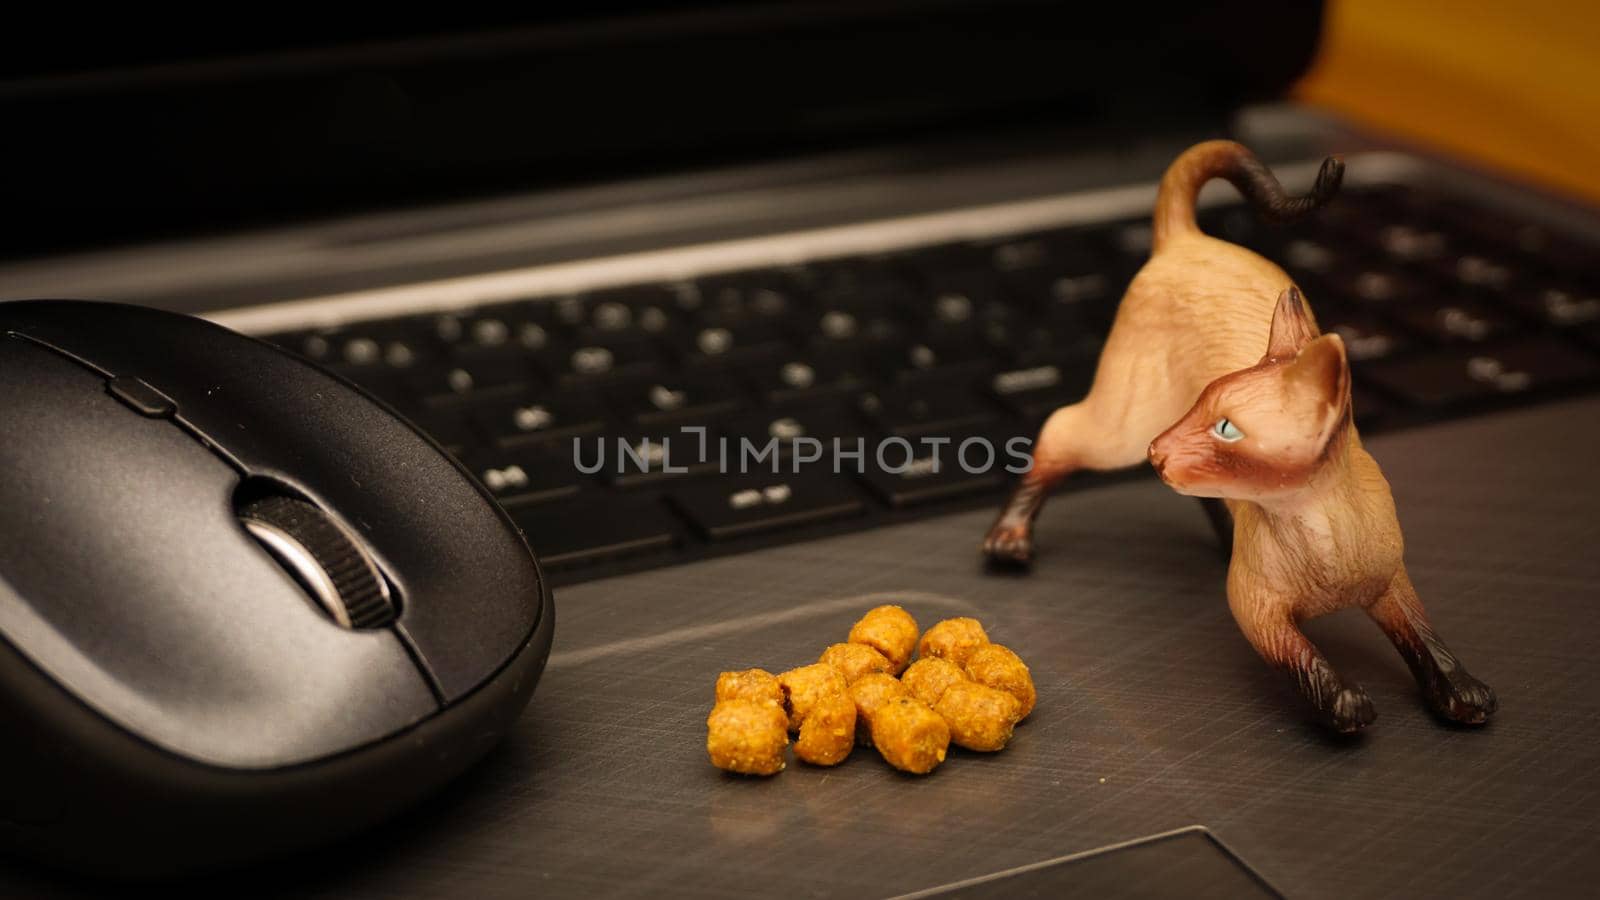 Online cat food illustration with miniature objects concept shot by tasci